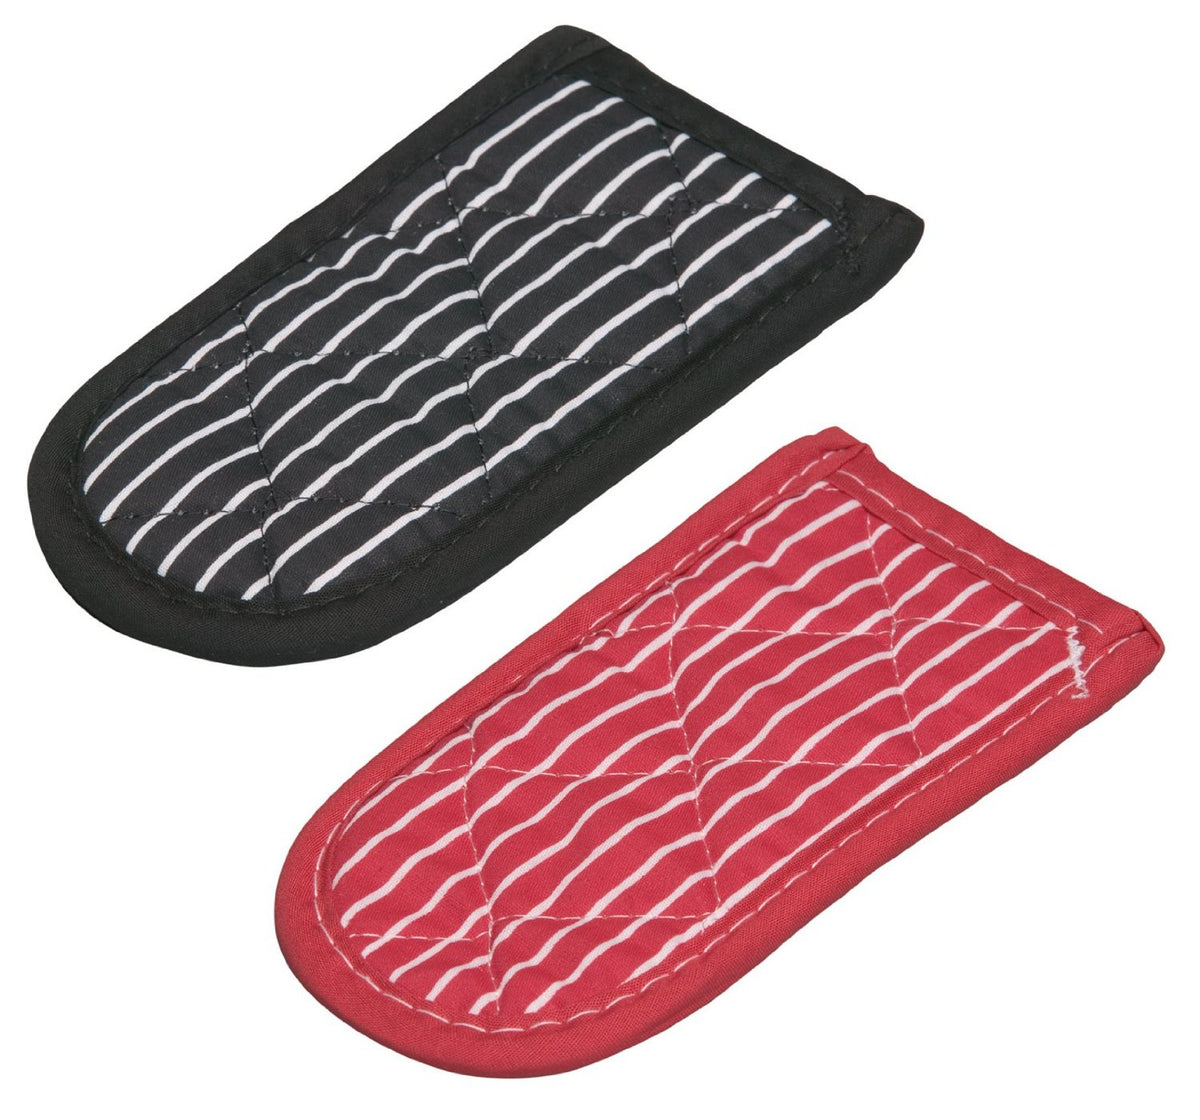 buy pot holders, mitts & kitchen textiles at cheap rate in bulk. wholesale & retail kitchen tools & supplies store.